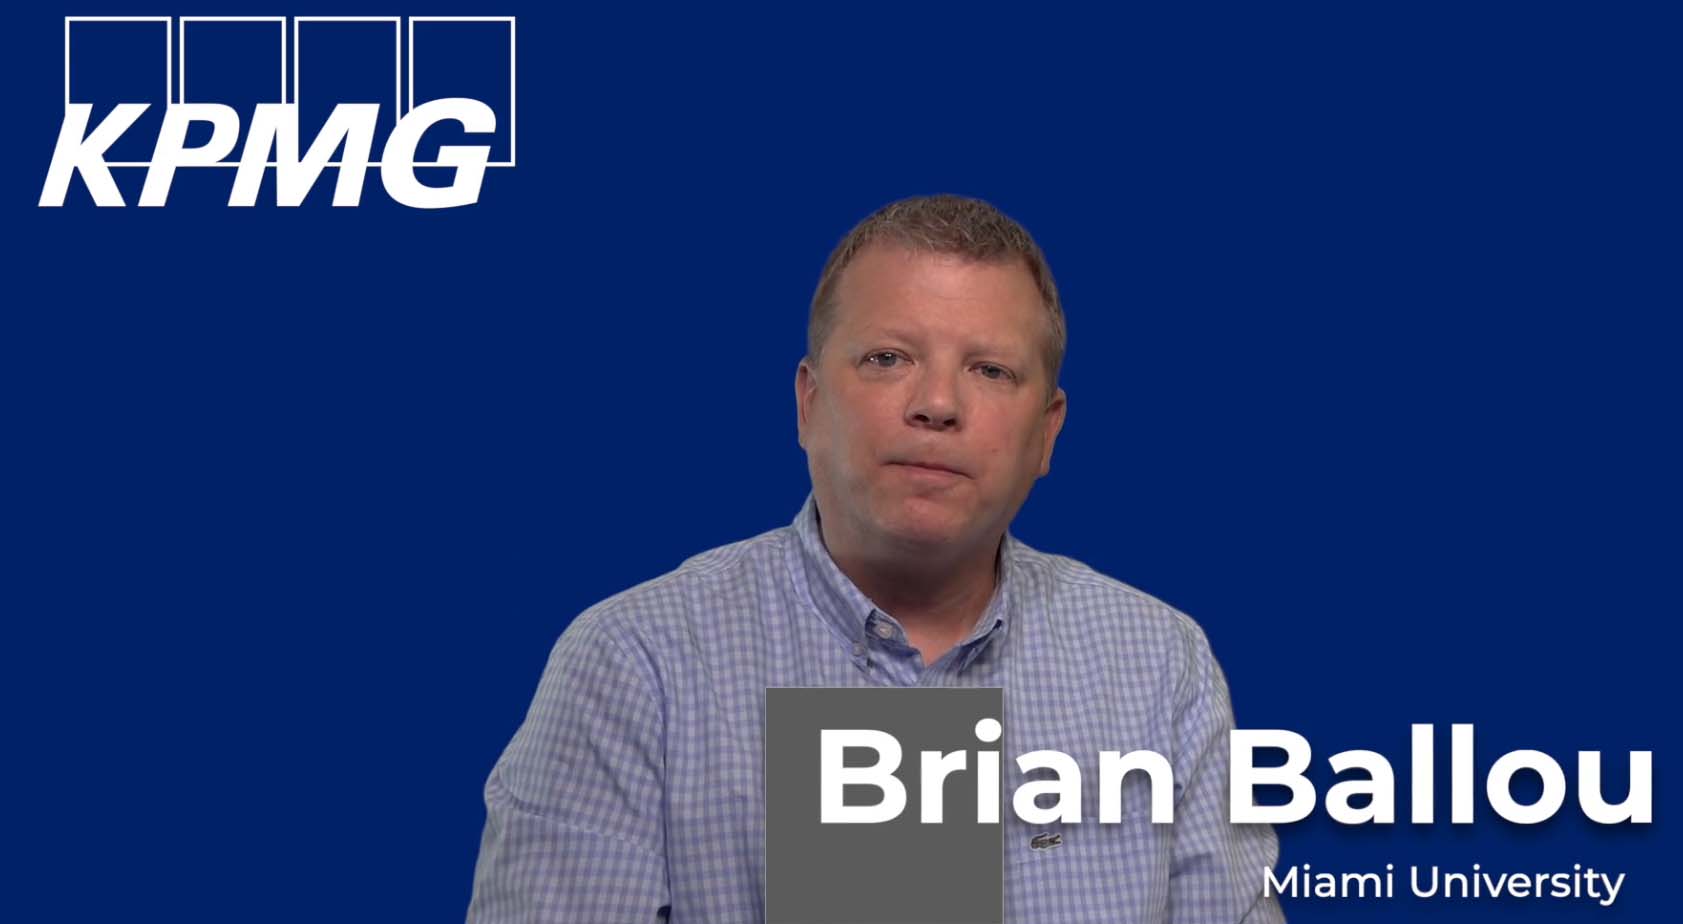 Brian Ballou during one of his KPMG training videos